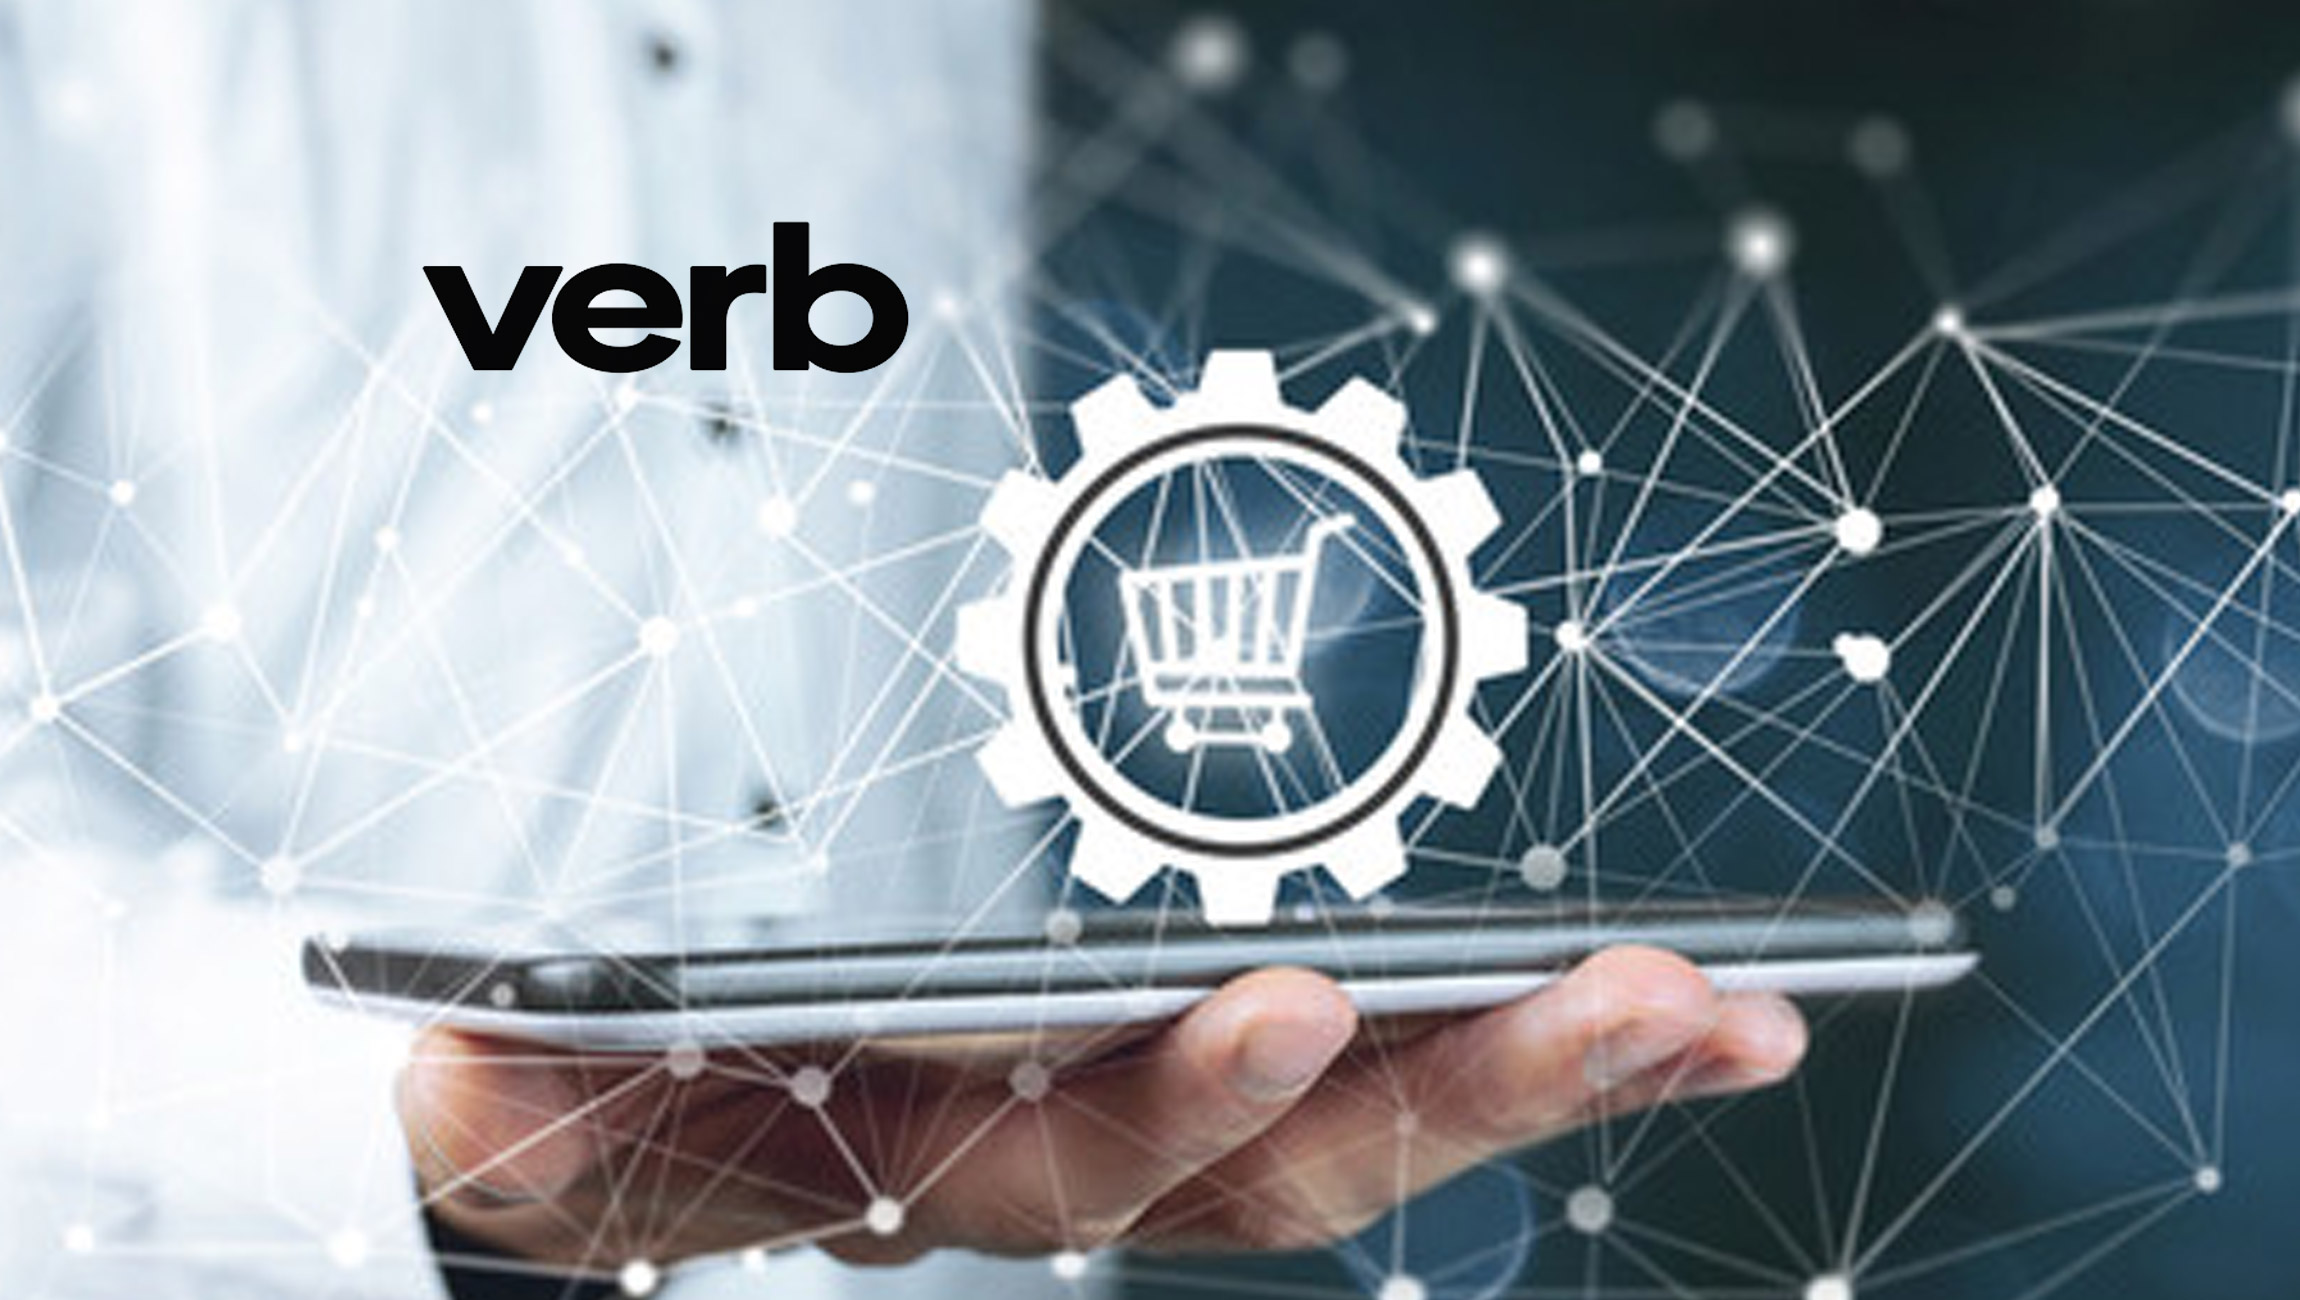 VERB’s MARKET Livestream Shopping Platform Now Drives Sales for Musicians, Artists, Authors, and Other Digital Content Creators